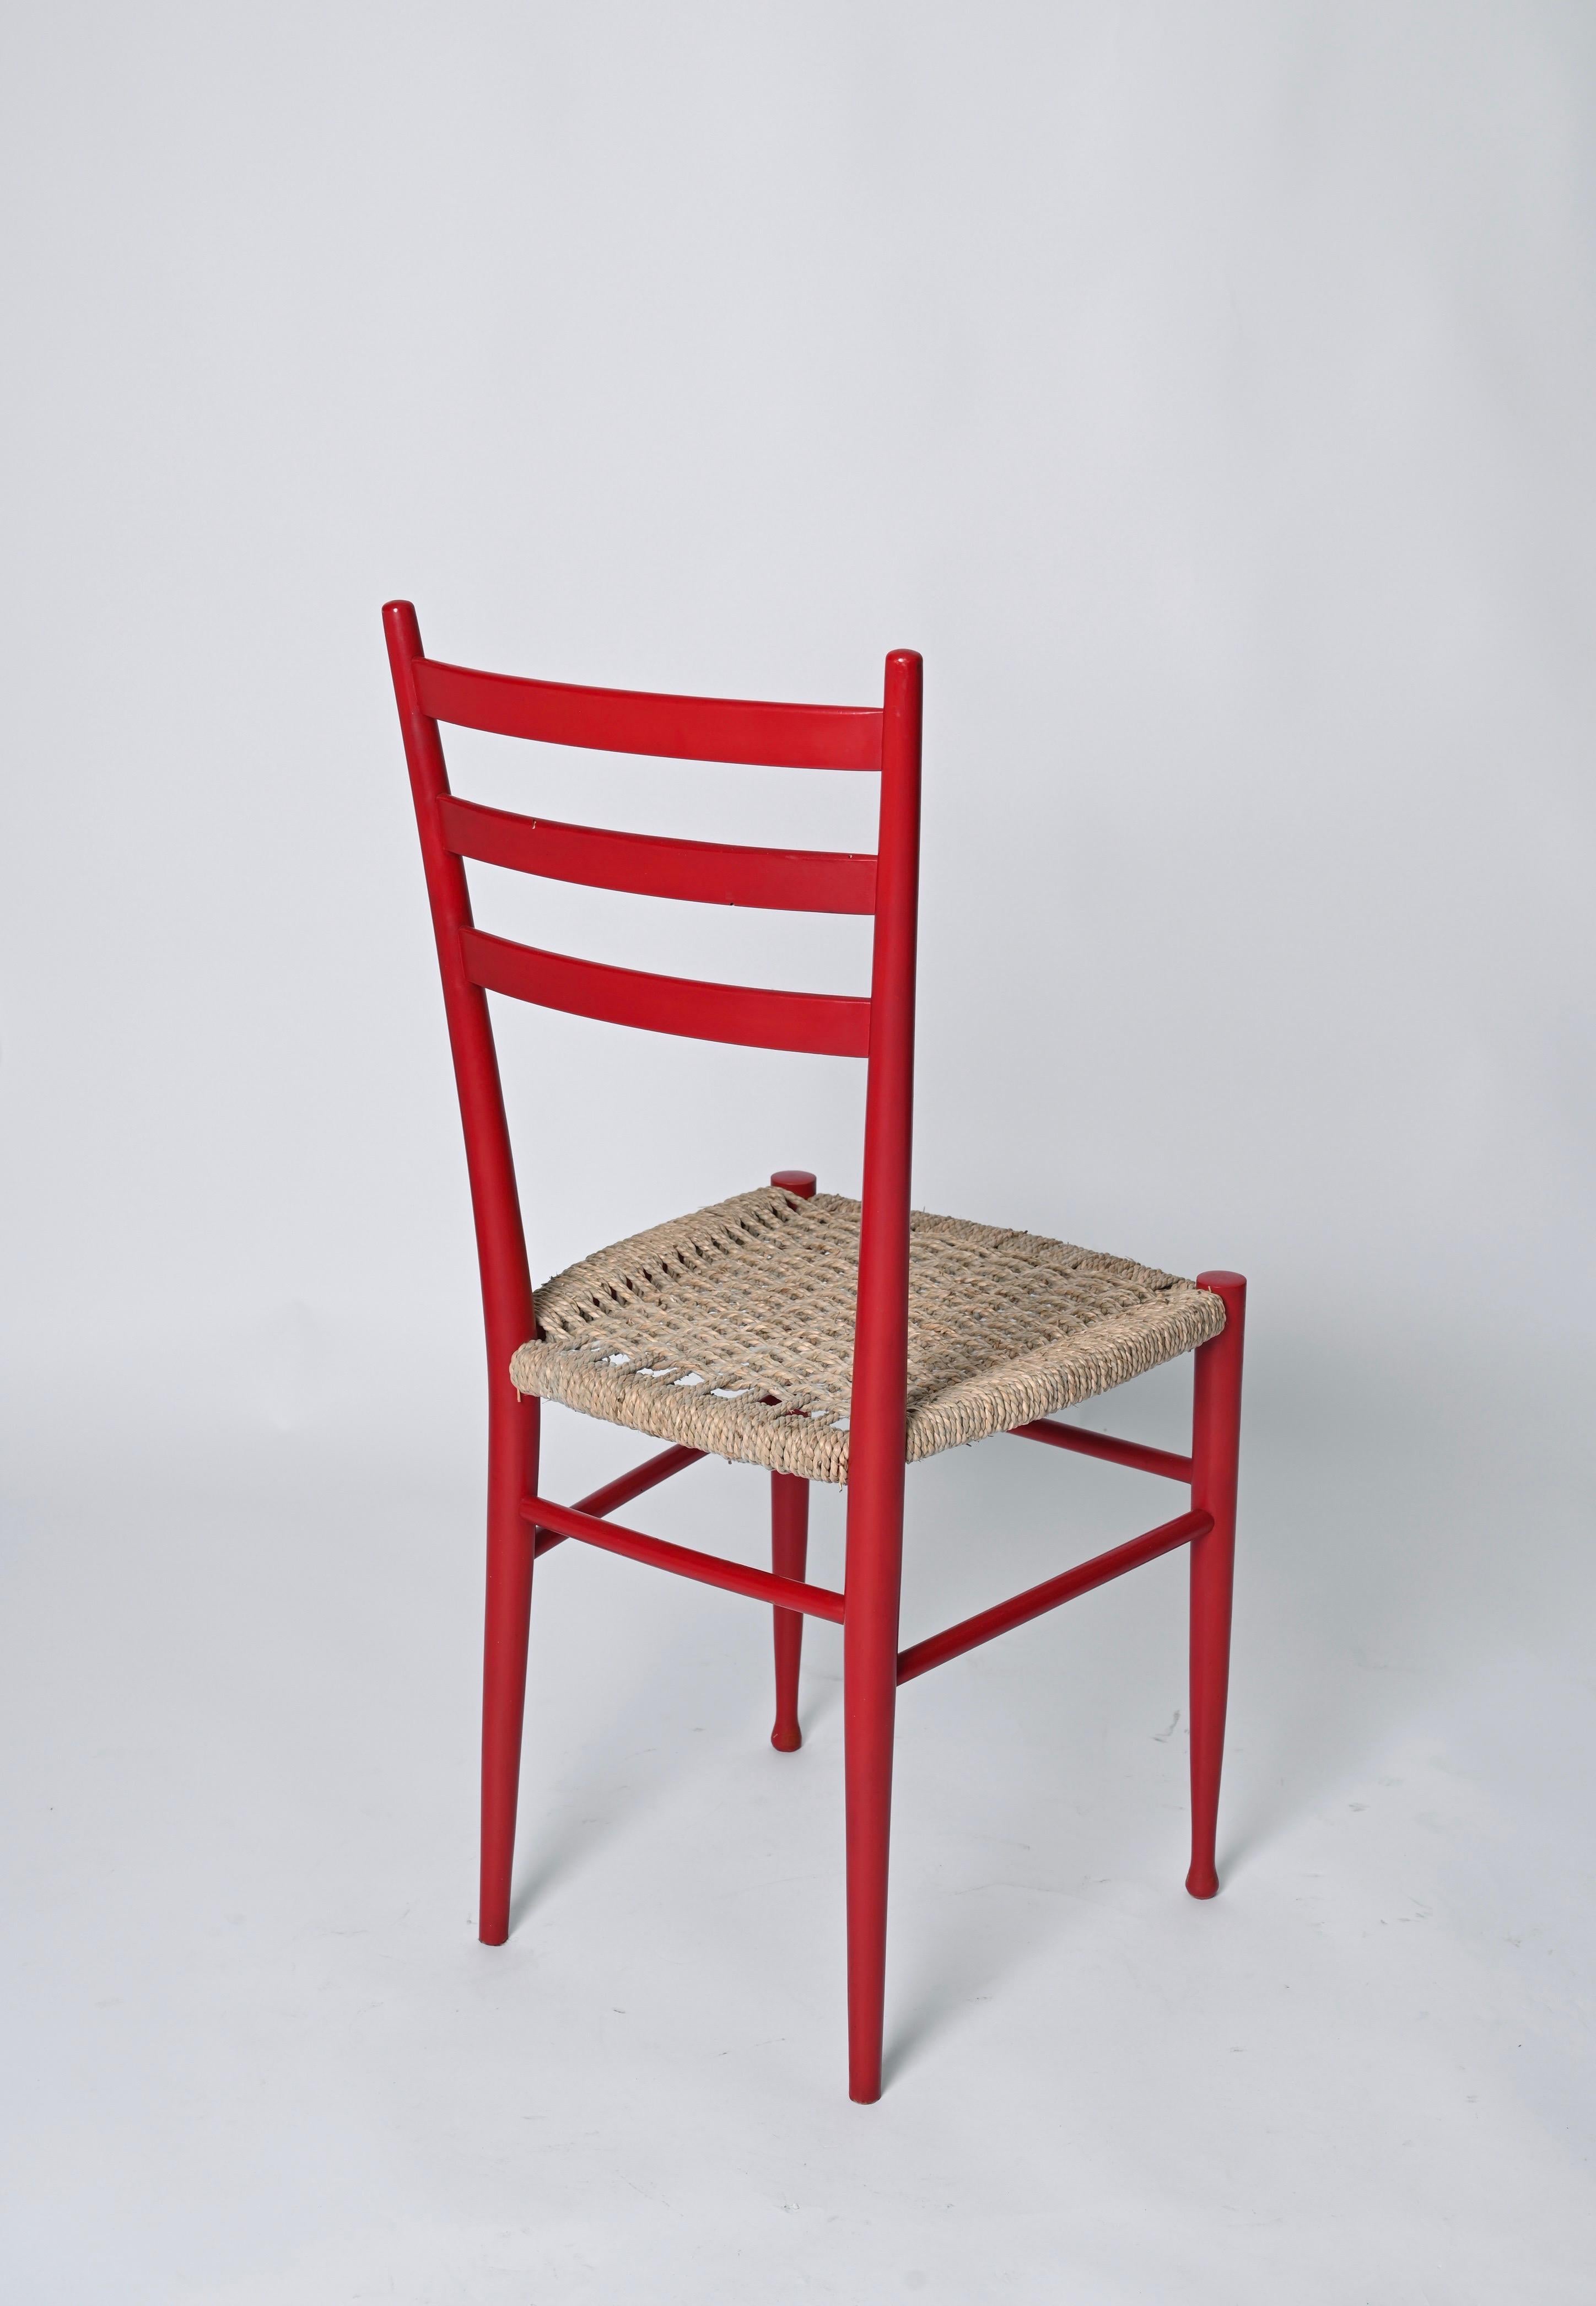 Wood Set of 4 Chiavarine Chairs in Red Stained Beech and Bamboo Rope, Italy 1950s For Sale